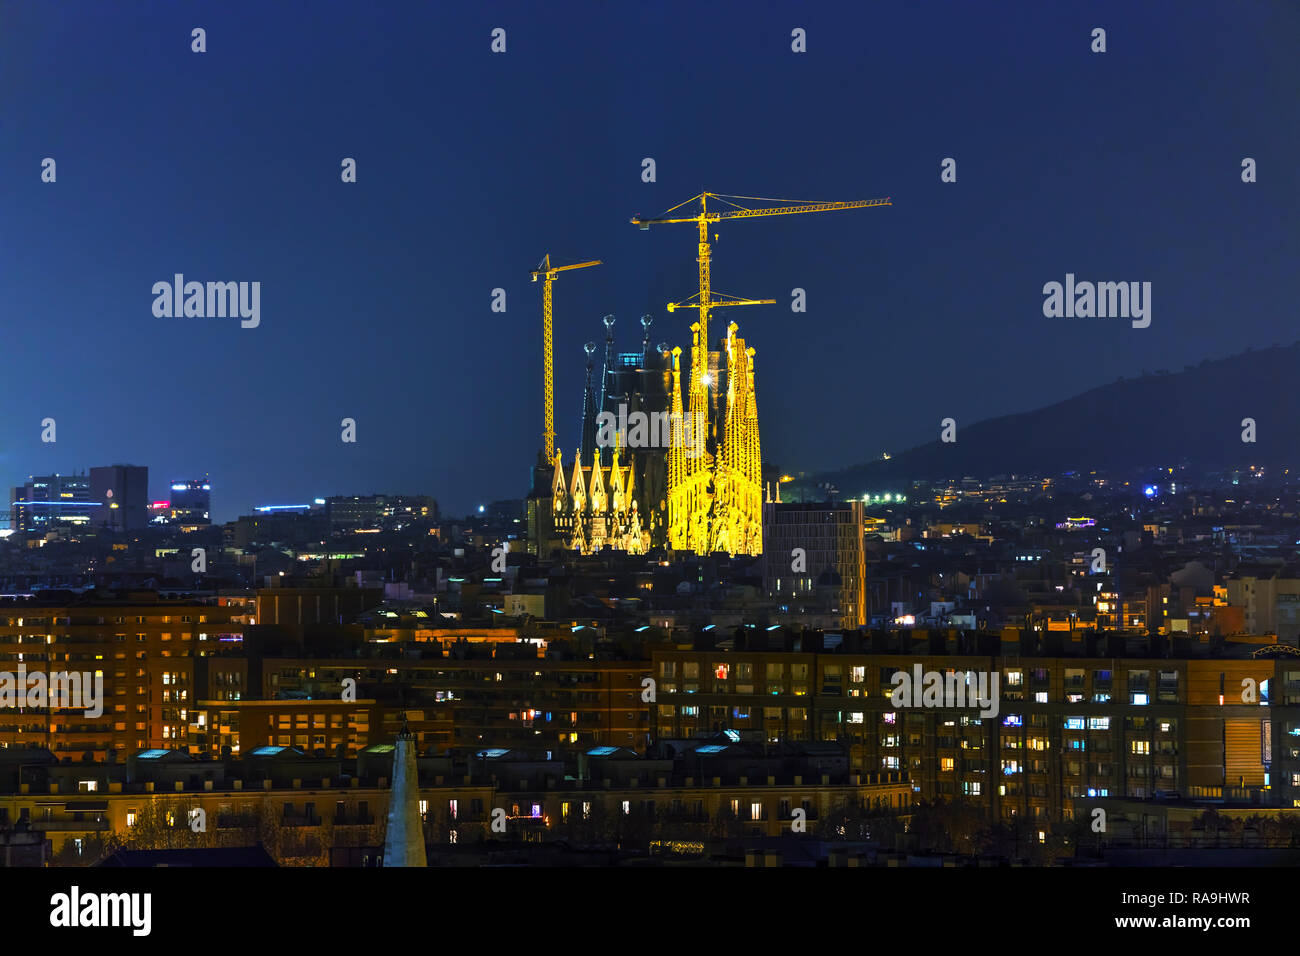 BARCELONA - DECEMBER 14: Aerial overview with Sagrada Familia at night time on December 14, 2018 in Barcelona, Spain. Stock Photo